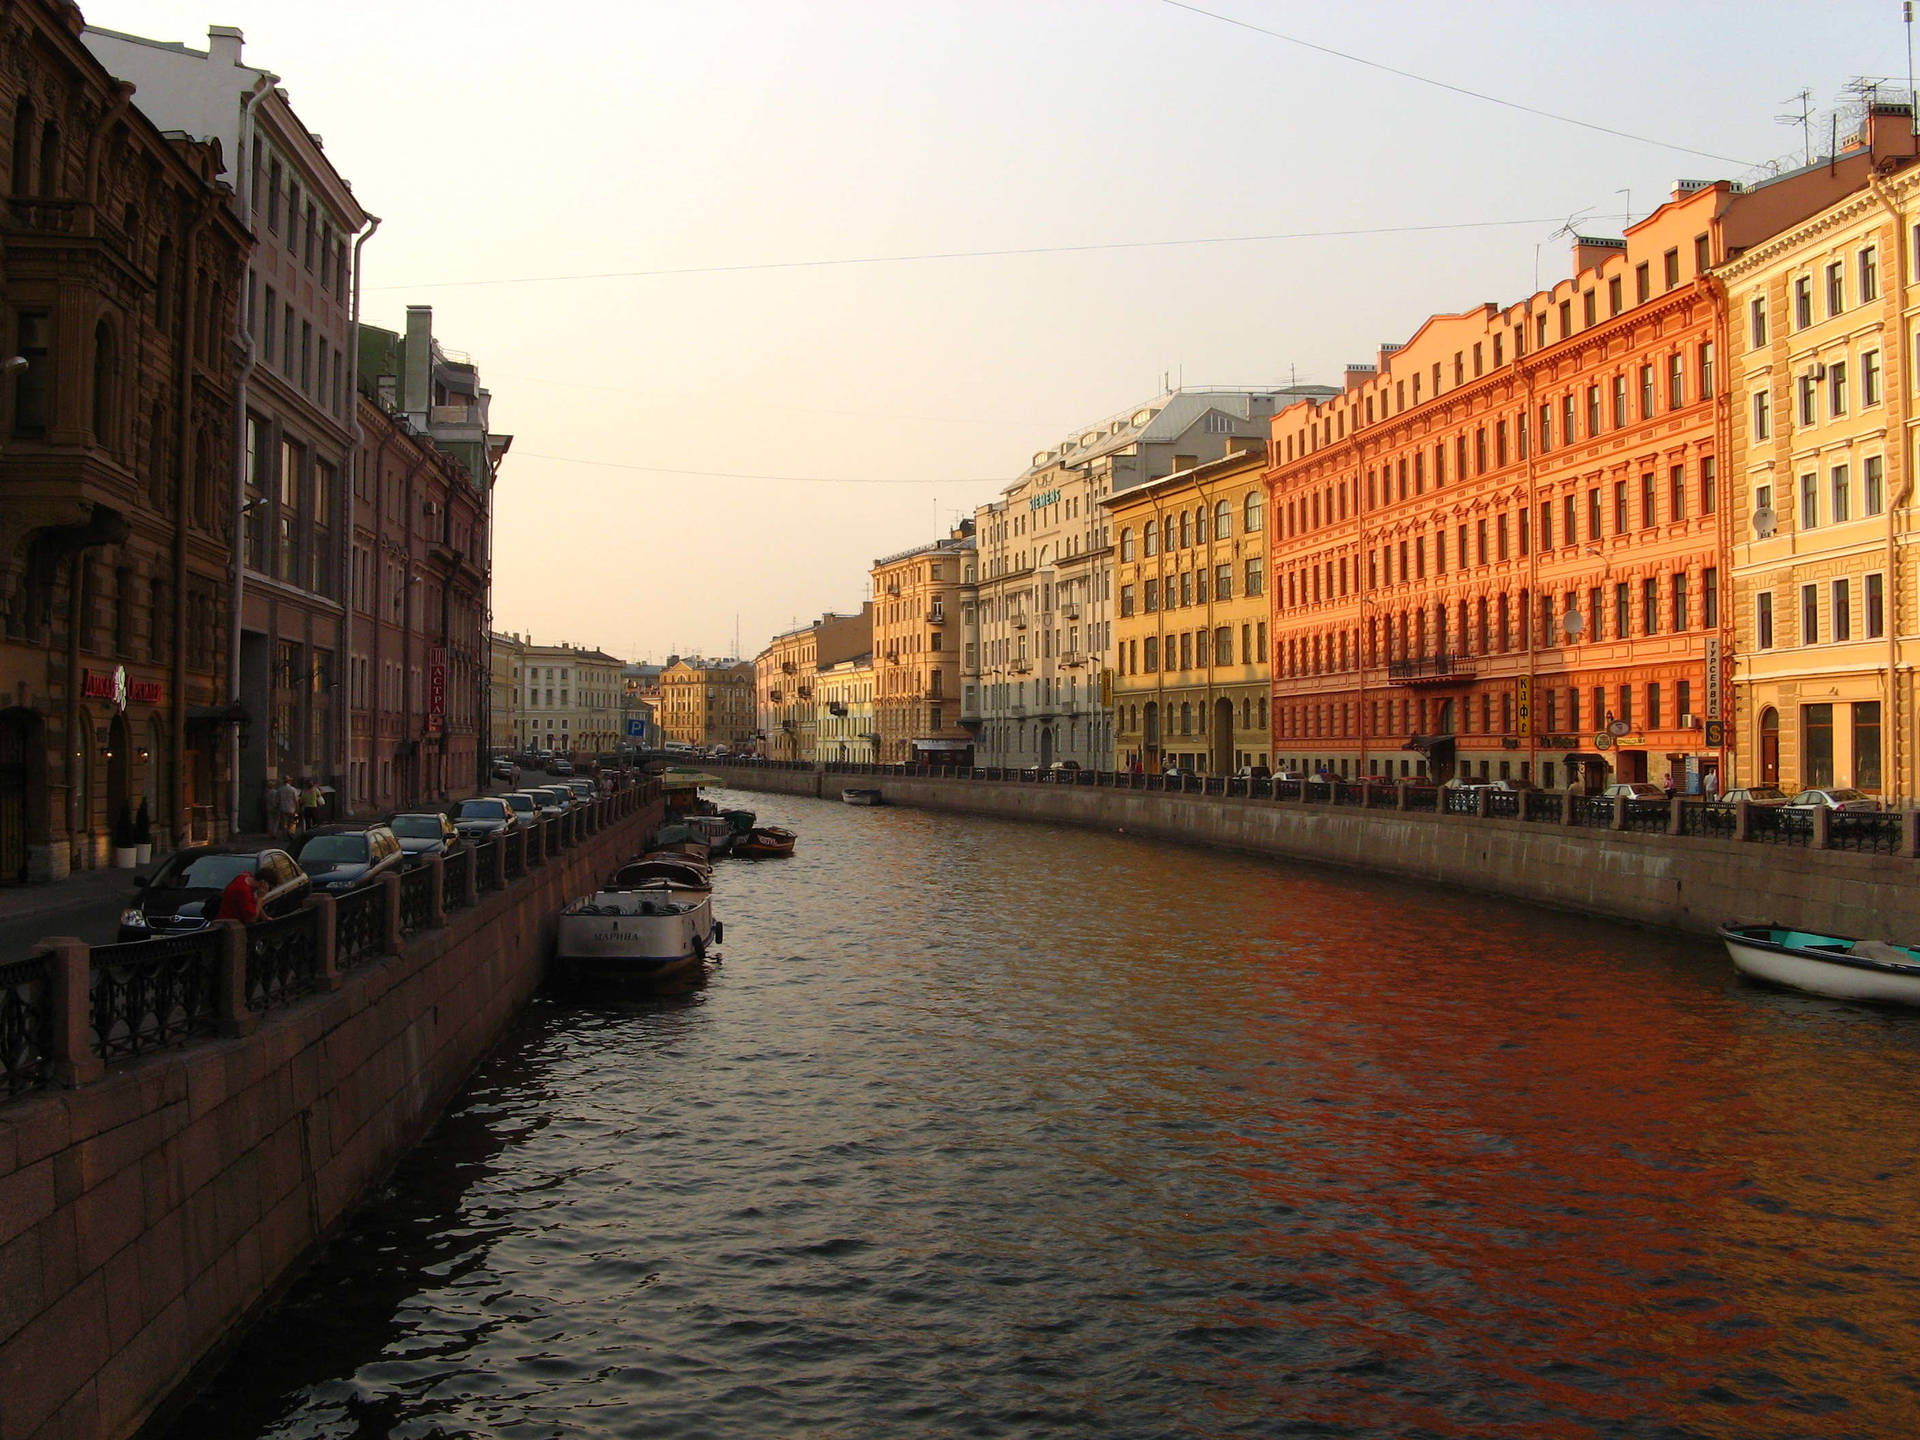 A Moyka River In St. Petersburg Wallpaper